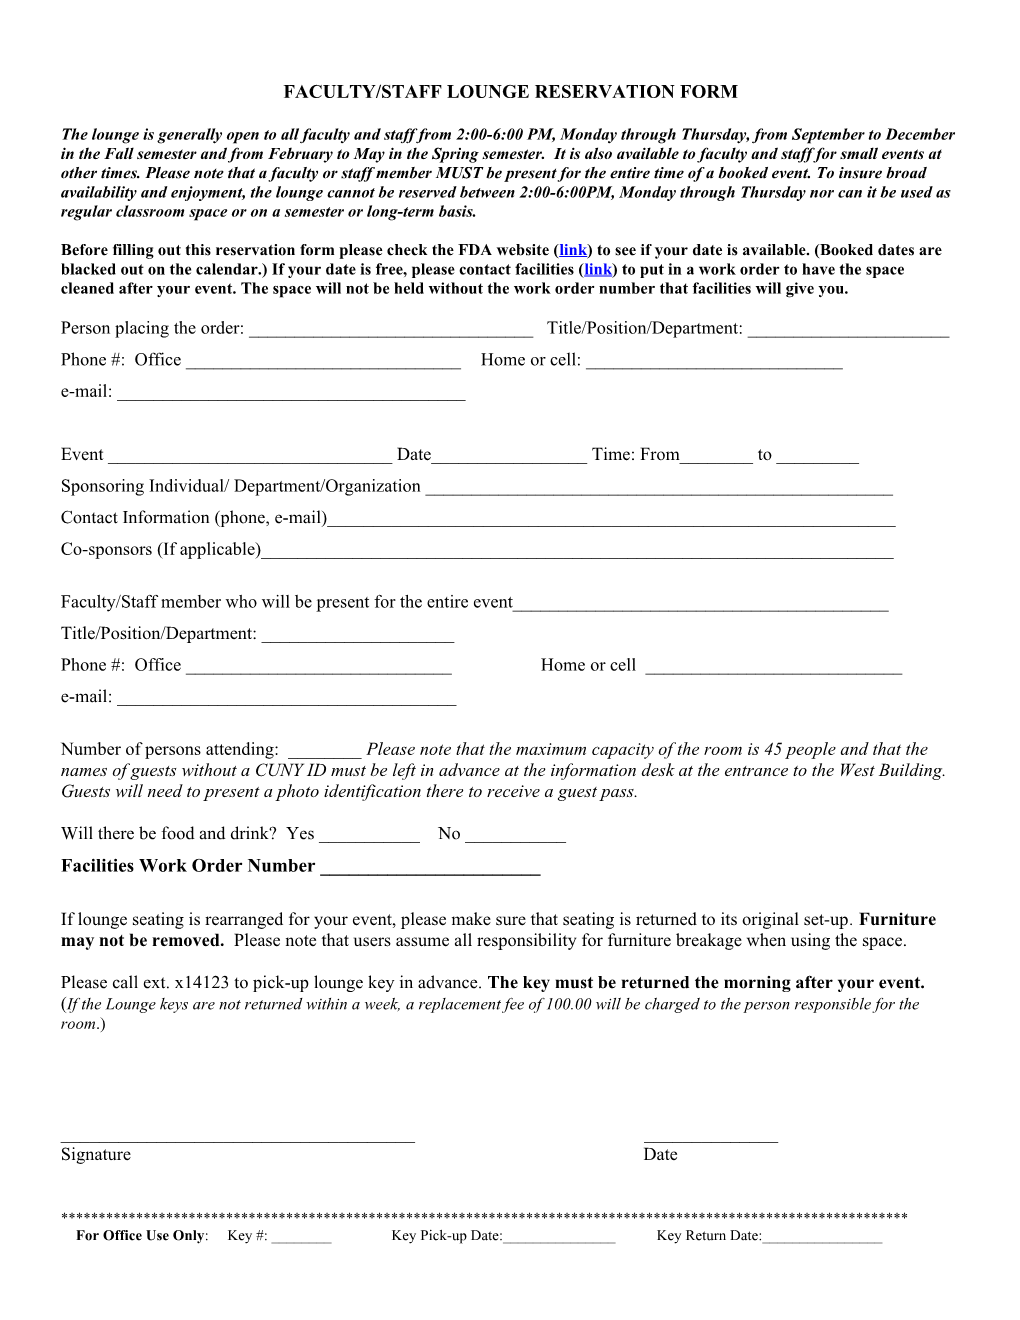 Faculty/Staff Lounge Reservation Form